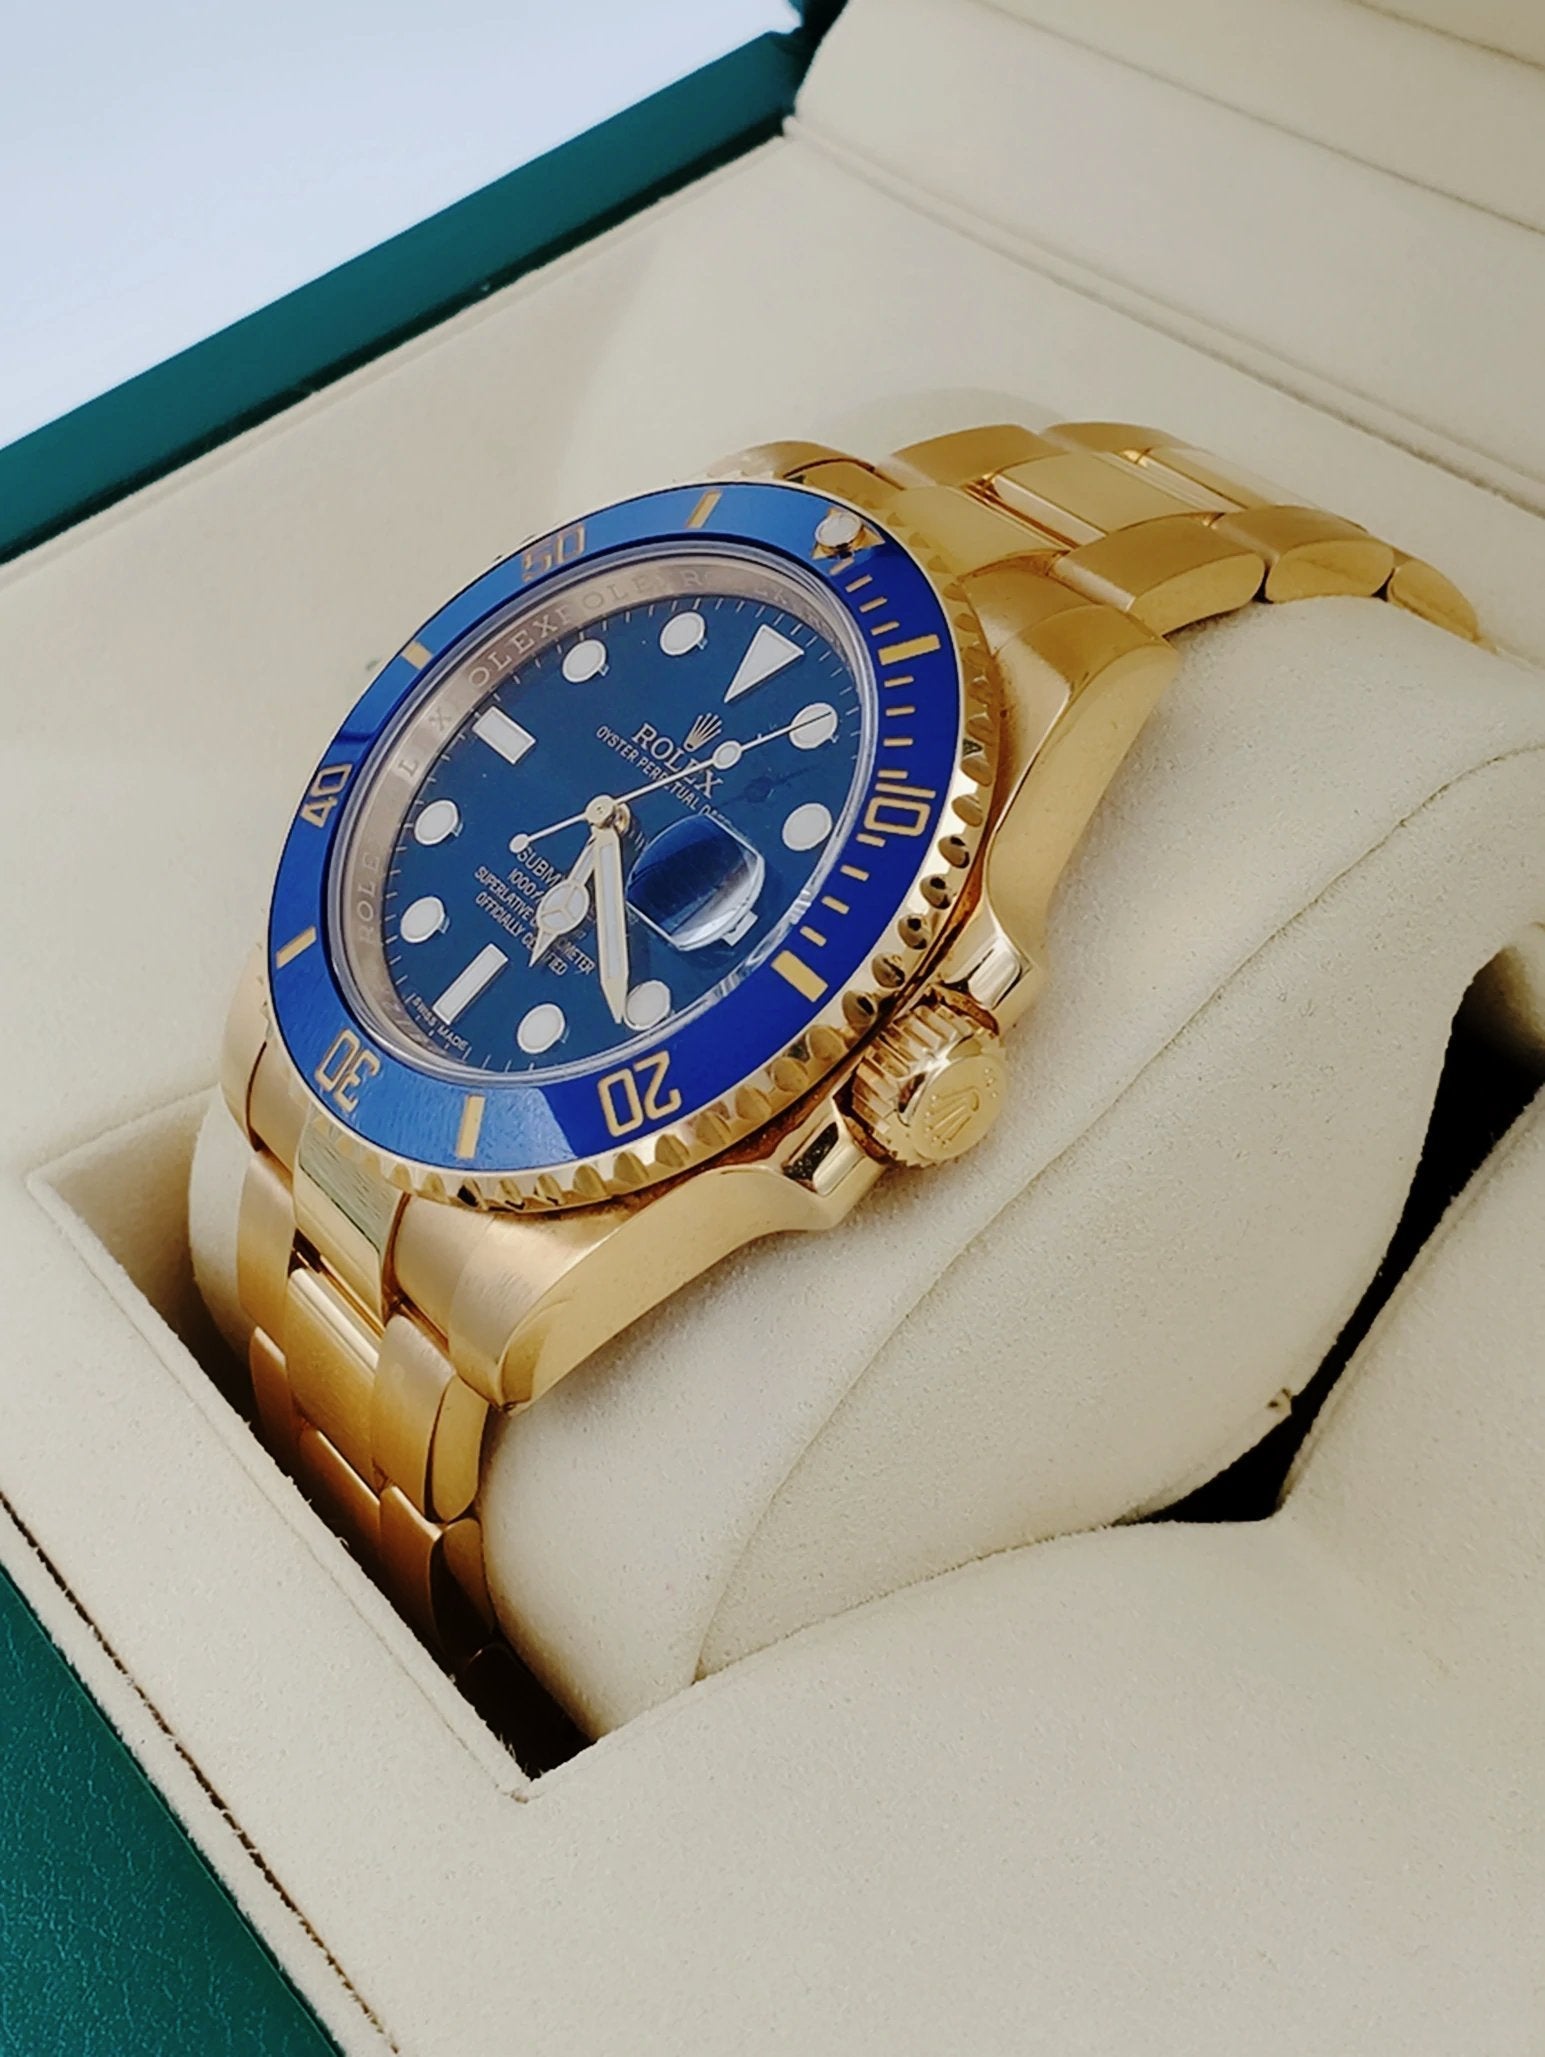 Men's Rolex Submariner 40mm Oyster Perpetual Date 18K Solid Yellow Gold Watch with Blue Dial and Blue Bezel. (NEW 116618)